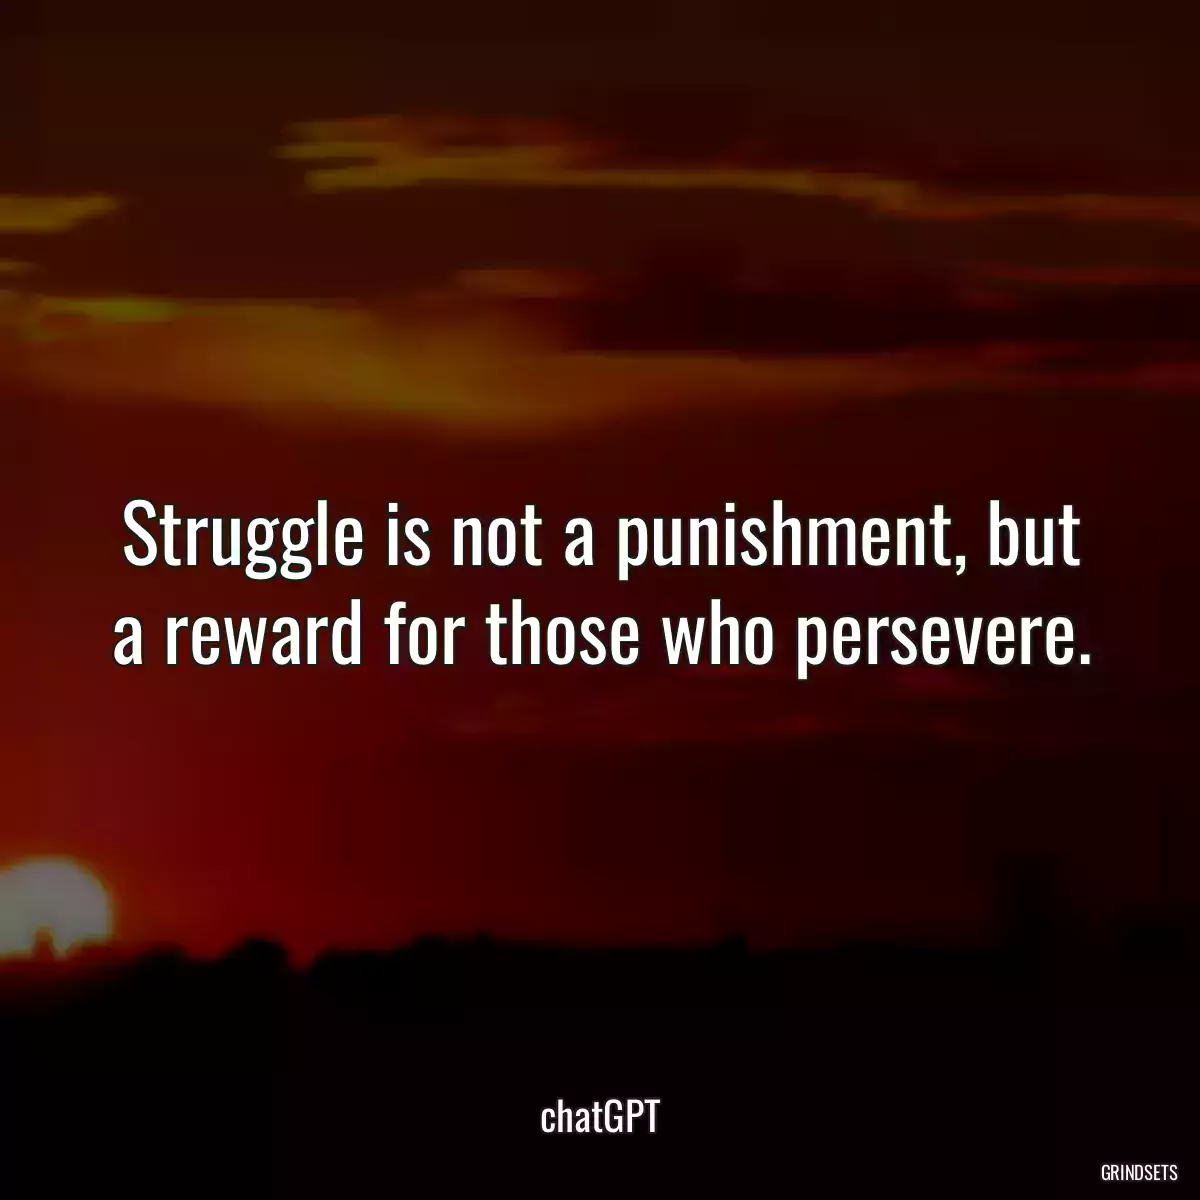 Struggle is not a punishment, but a reward for those who persevere.